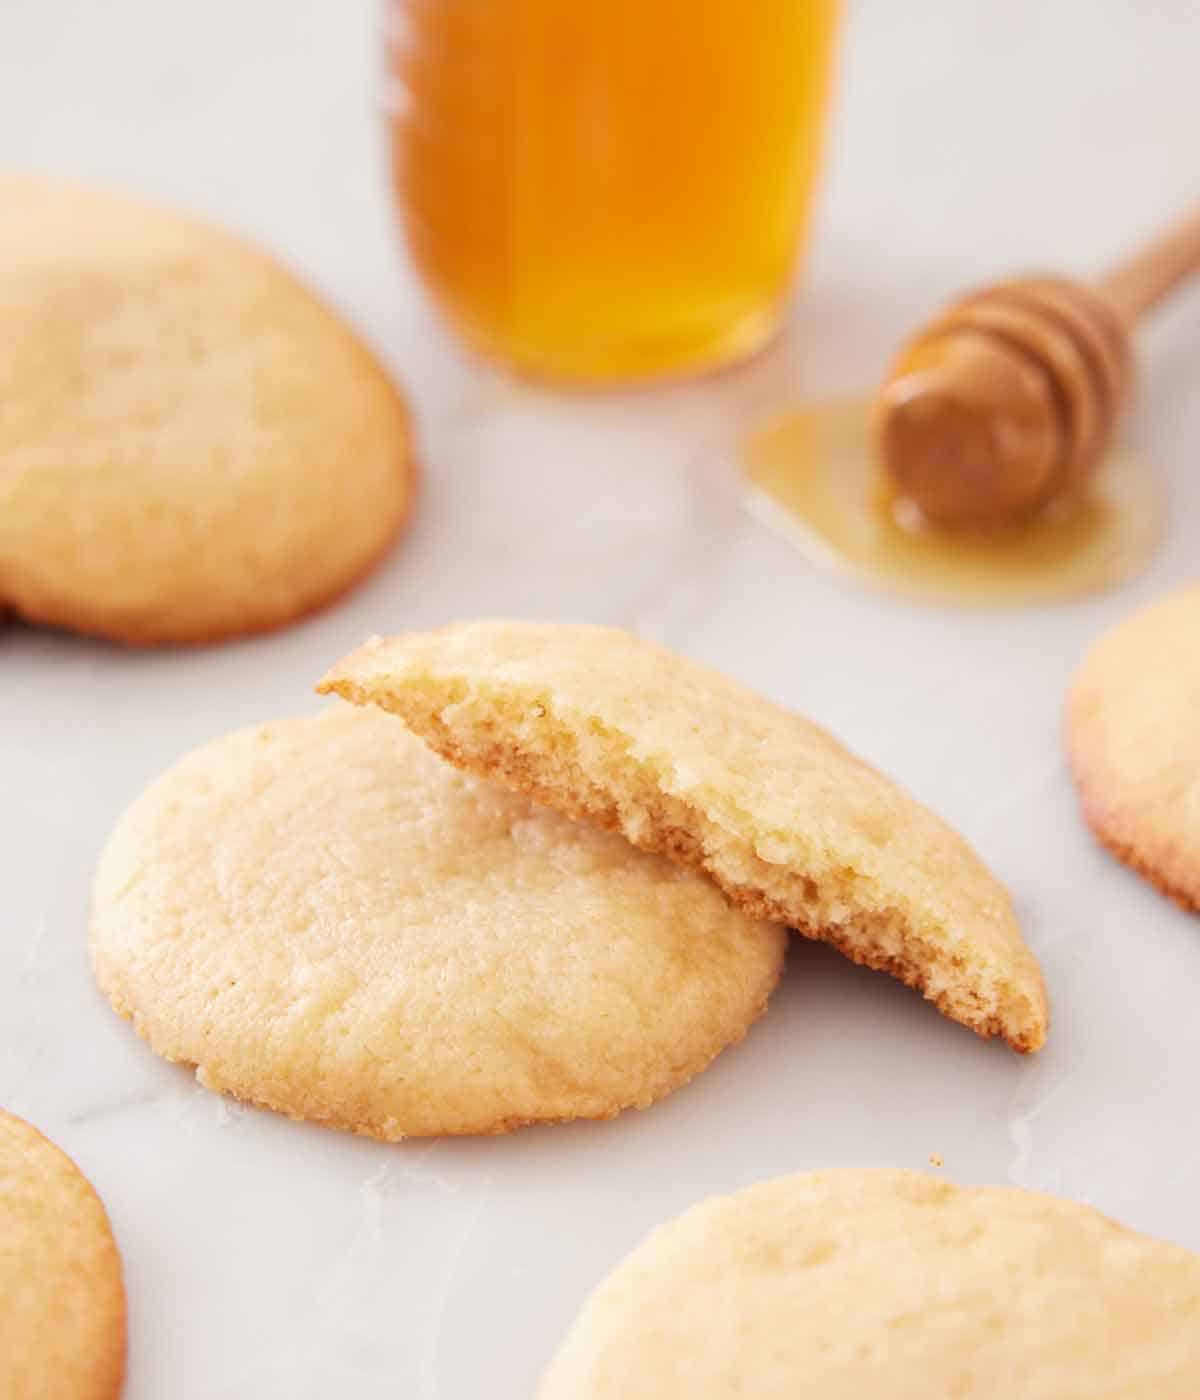 A honey cookie with a half cookie stack on it, showing the inside texture.